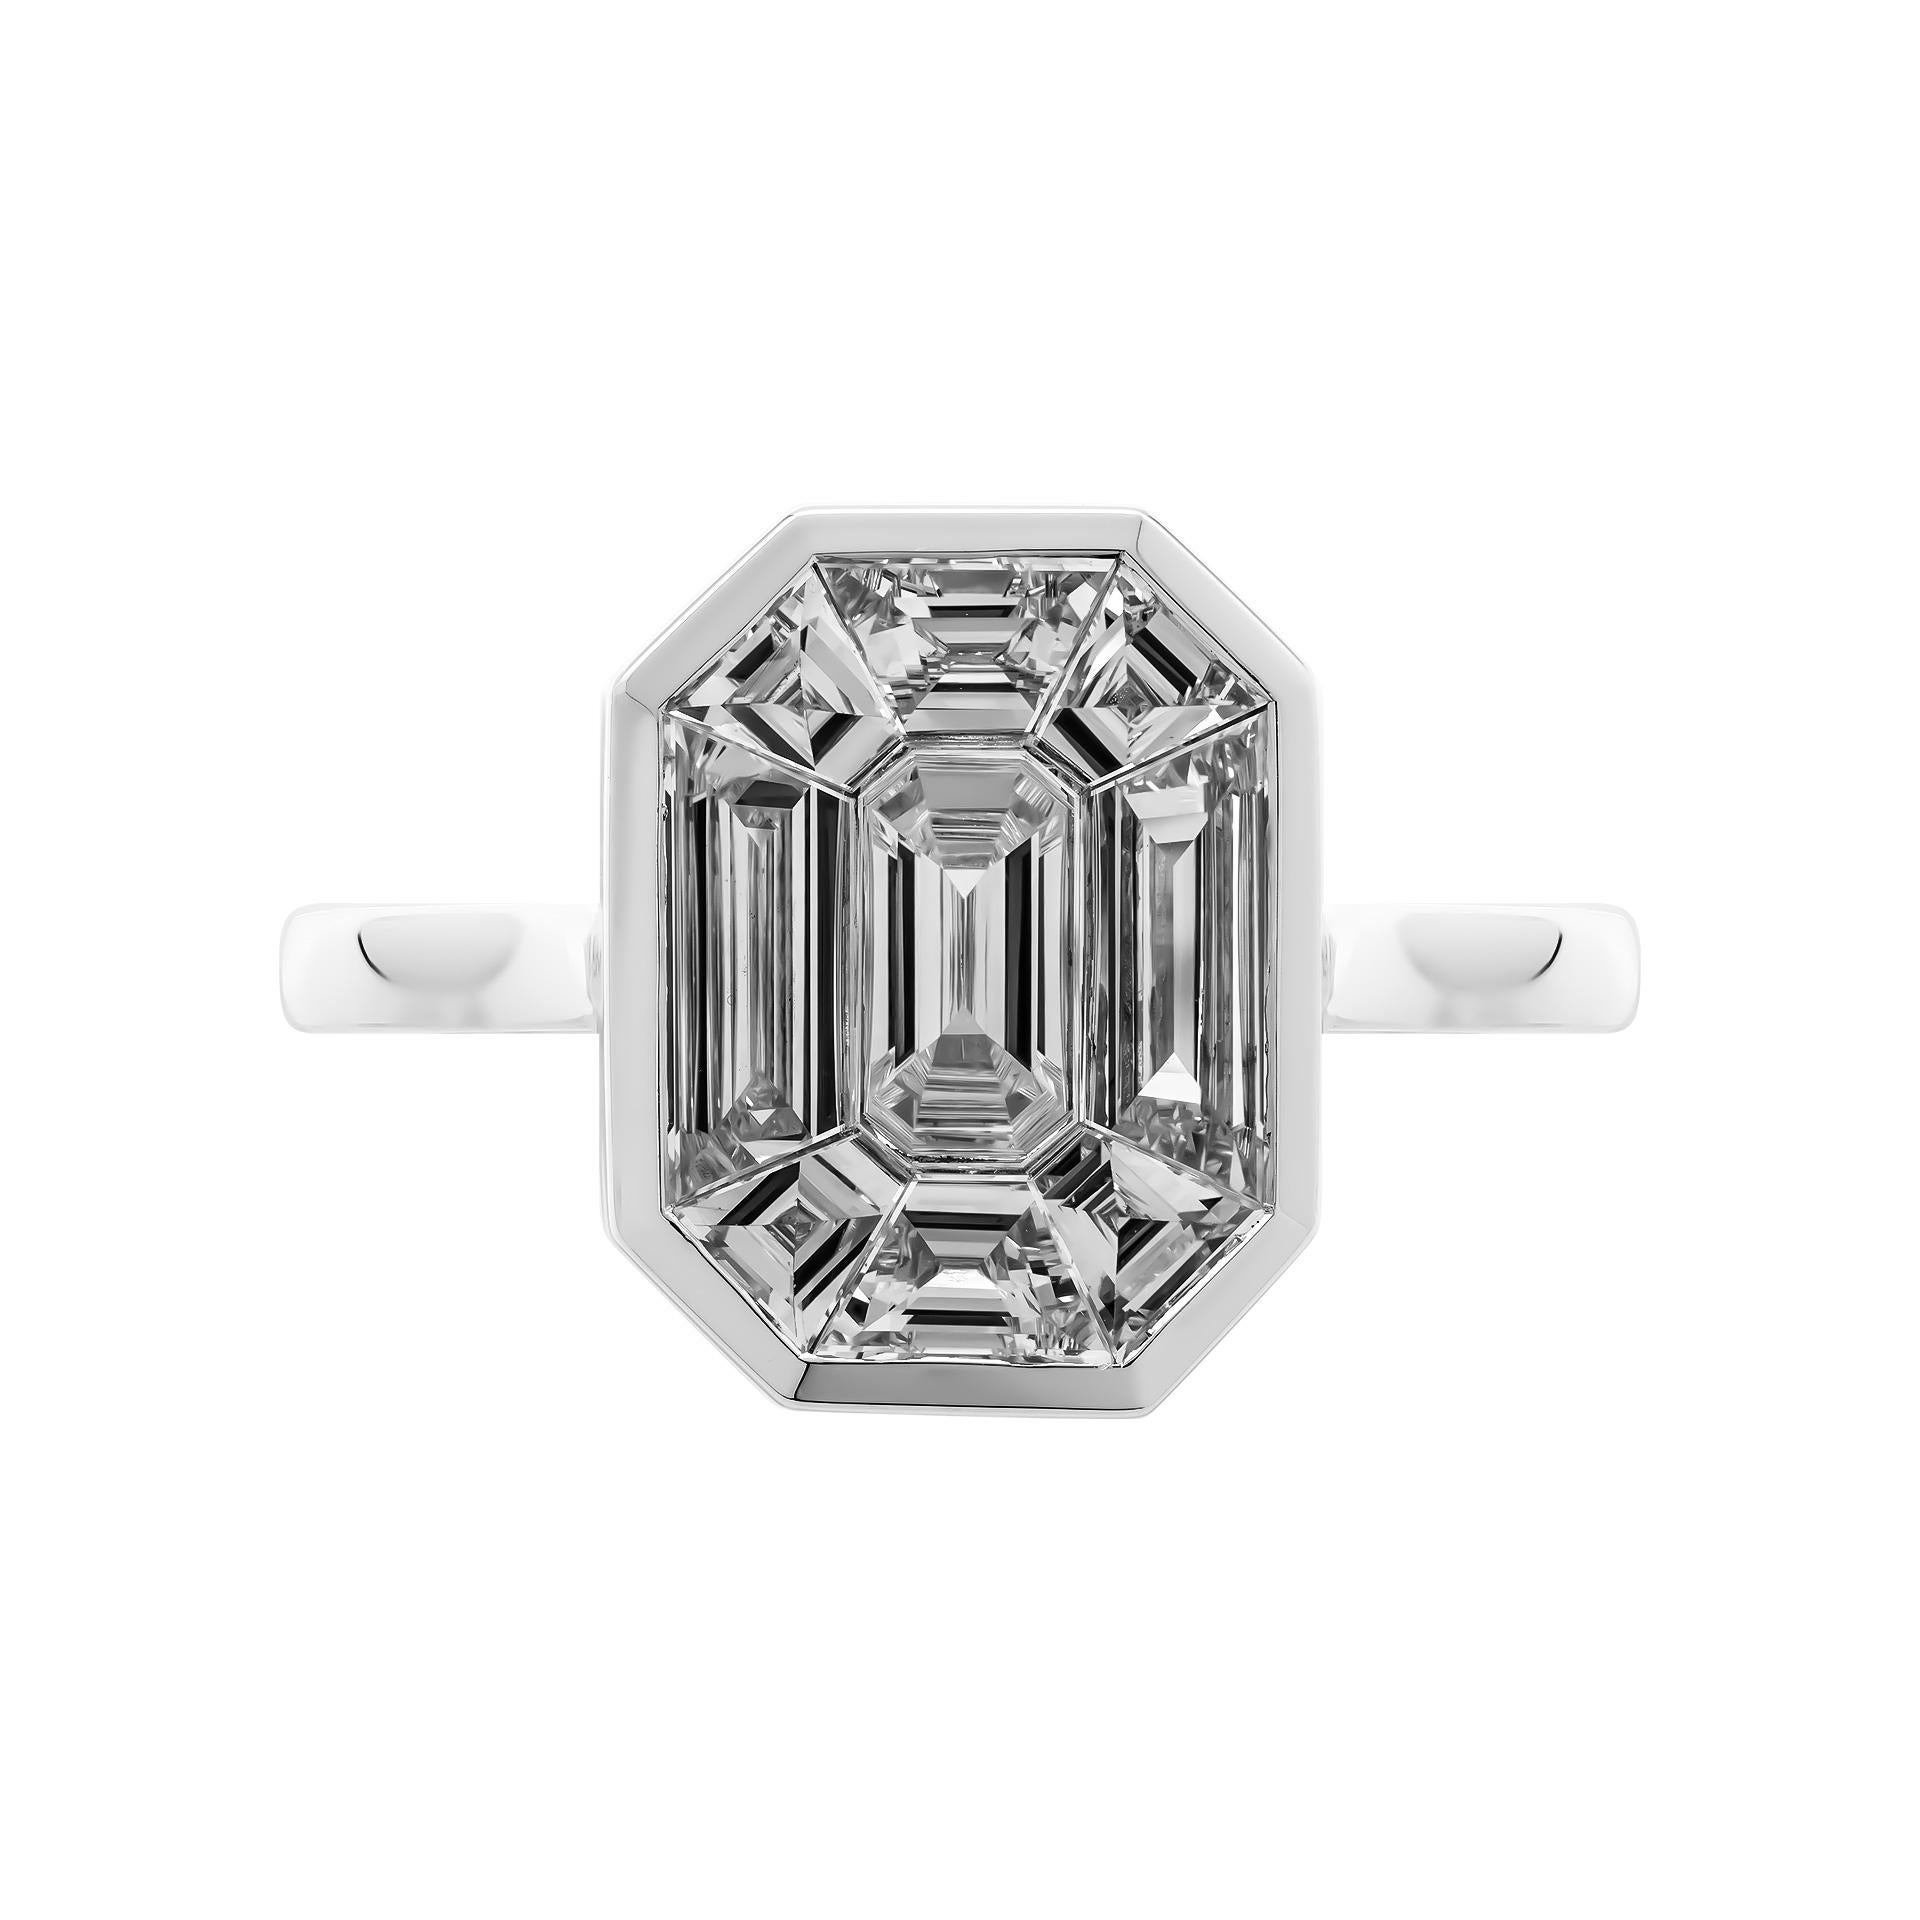 An Absolute stunner !
Beautiful, edgy yet timeless piece - Emerald cut ring set with Pie Cut diamond totaling 1.81ct delivering the look of 4-5 carat for a fraction of the price! All diamonds are natural F-G color VVS clarity , 9 perfectly cut